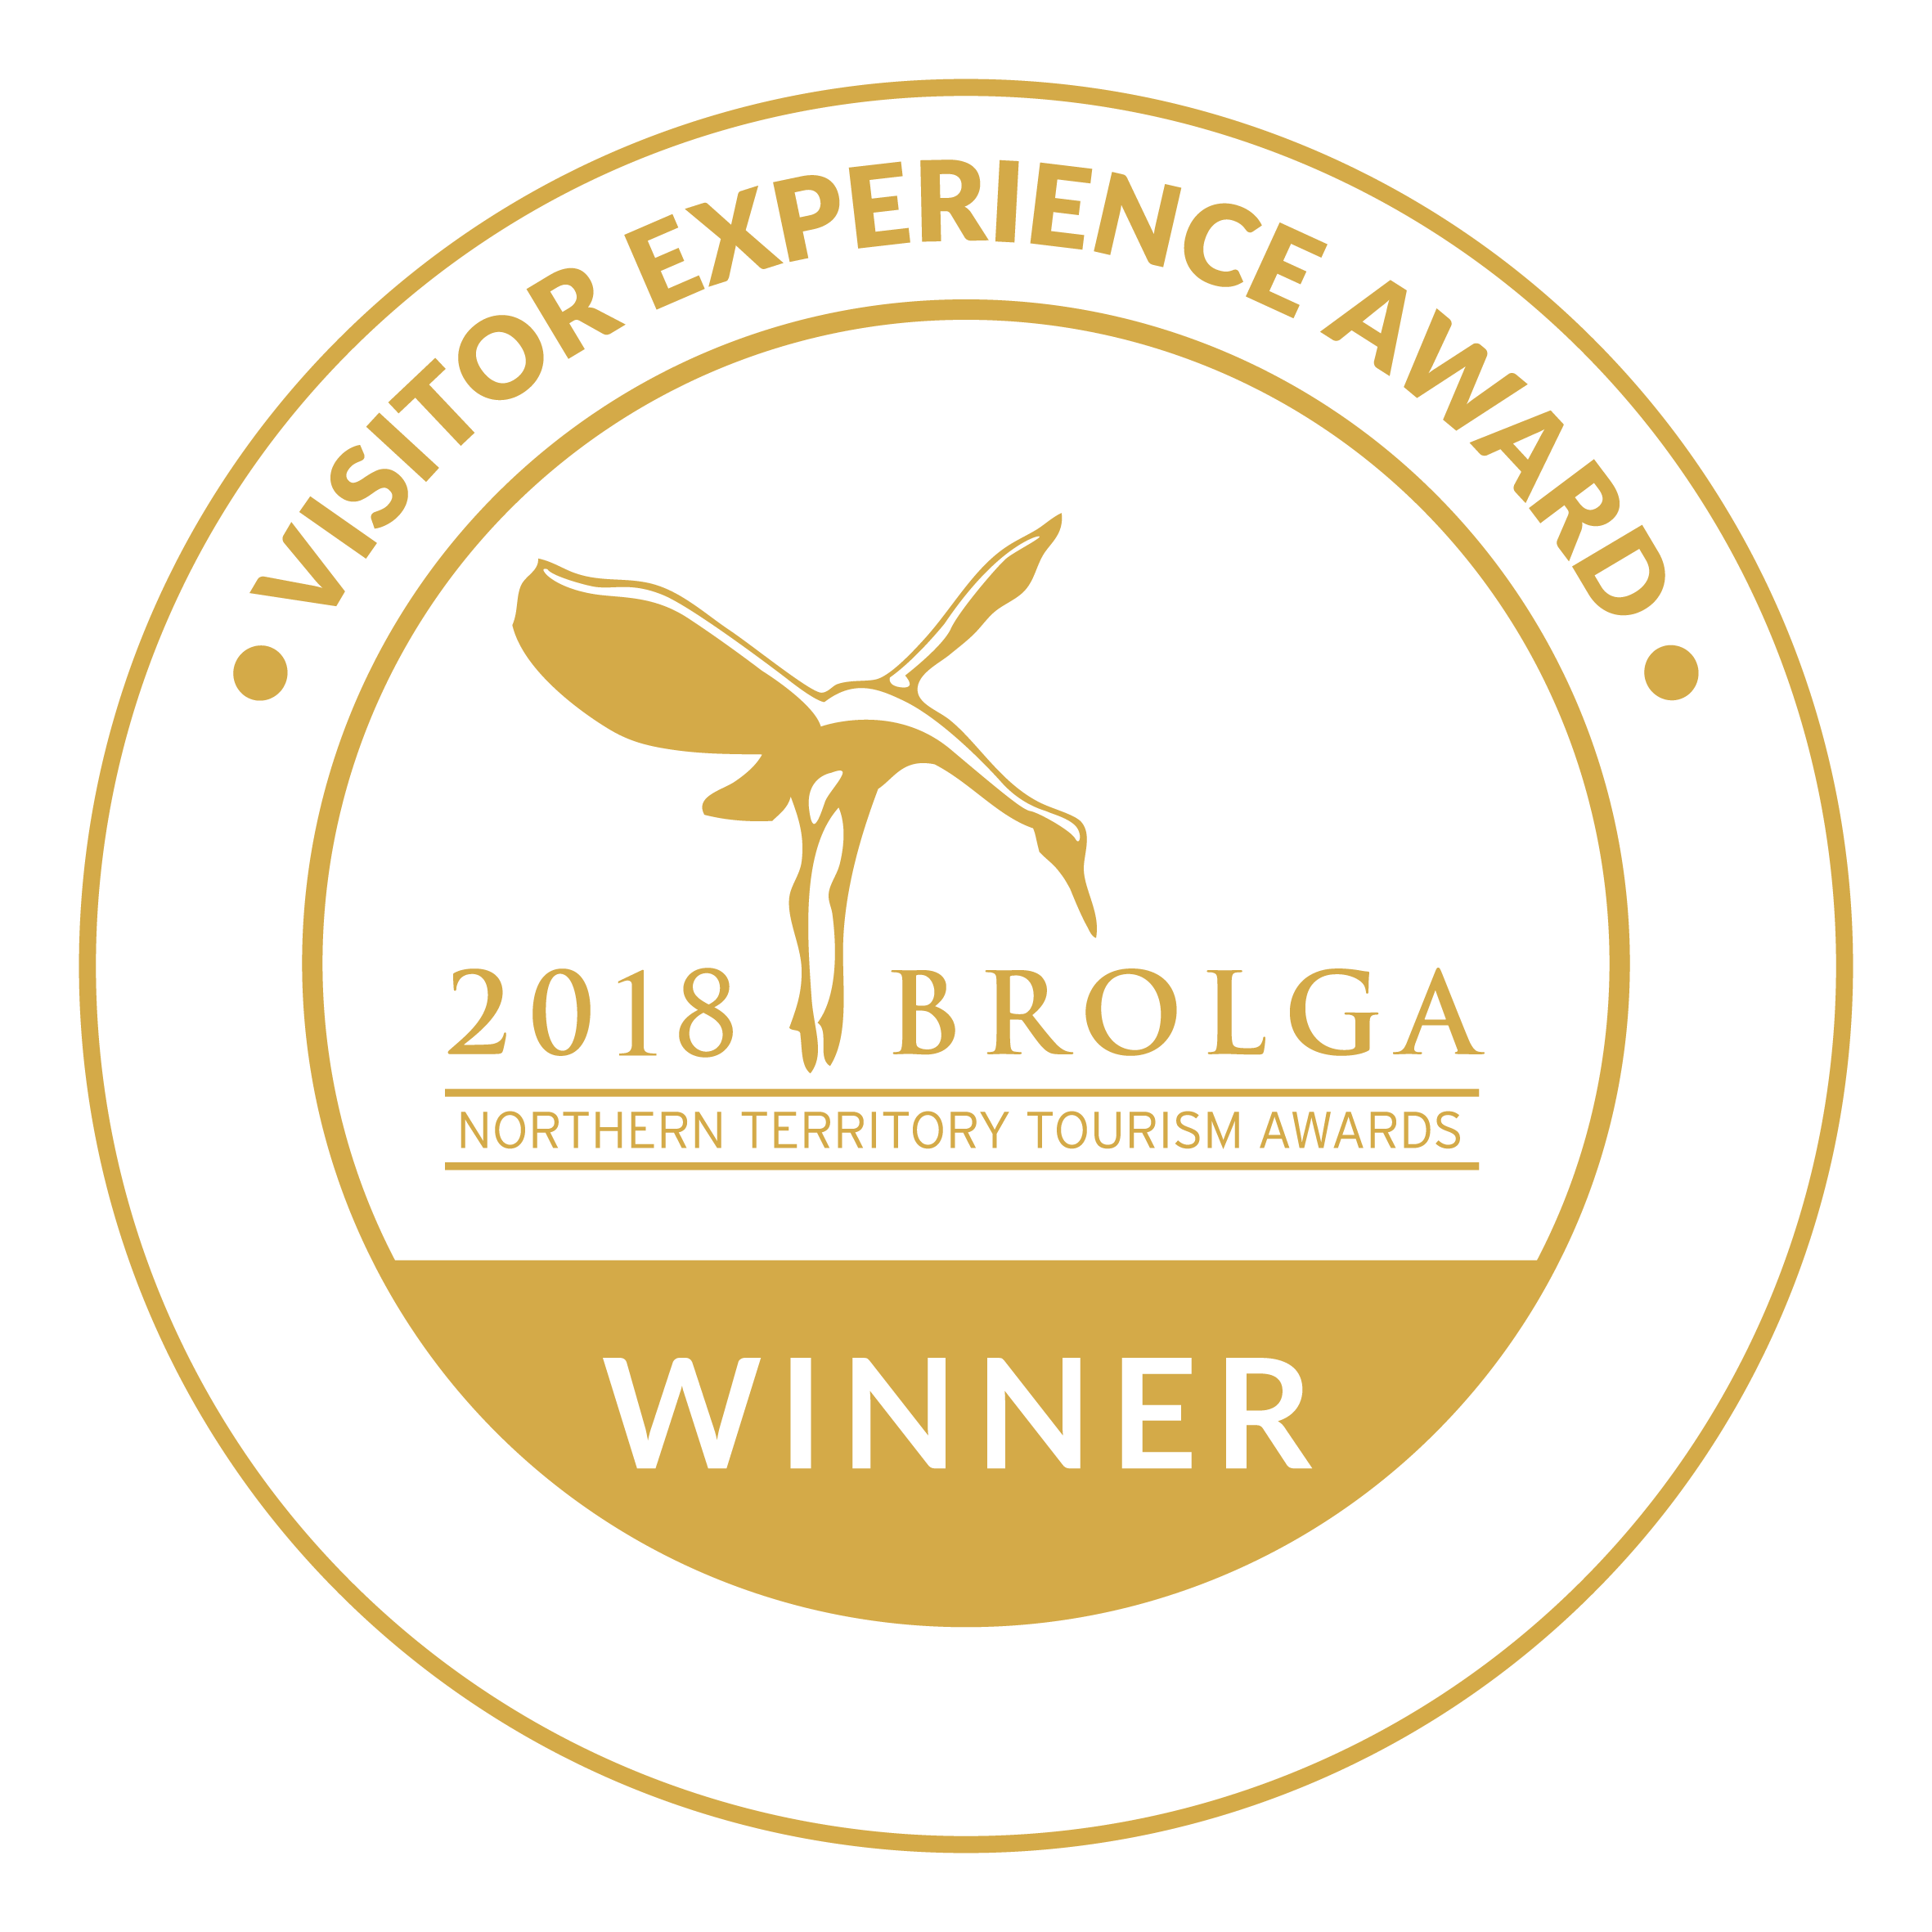 https://www.tomcurtain.com.au/wp-content/uploads/2020/03/2018-Brolga-Visitor-Experience-Award.png